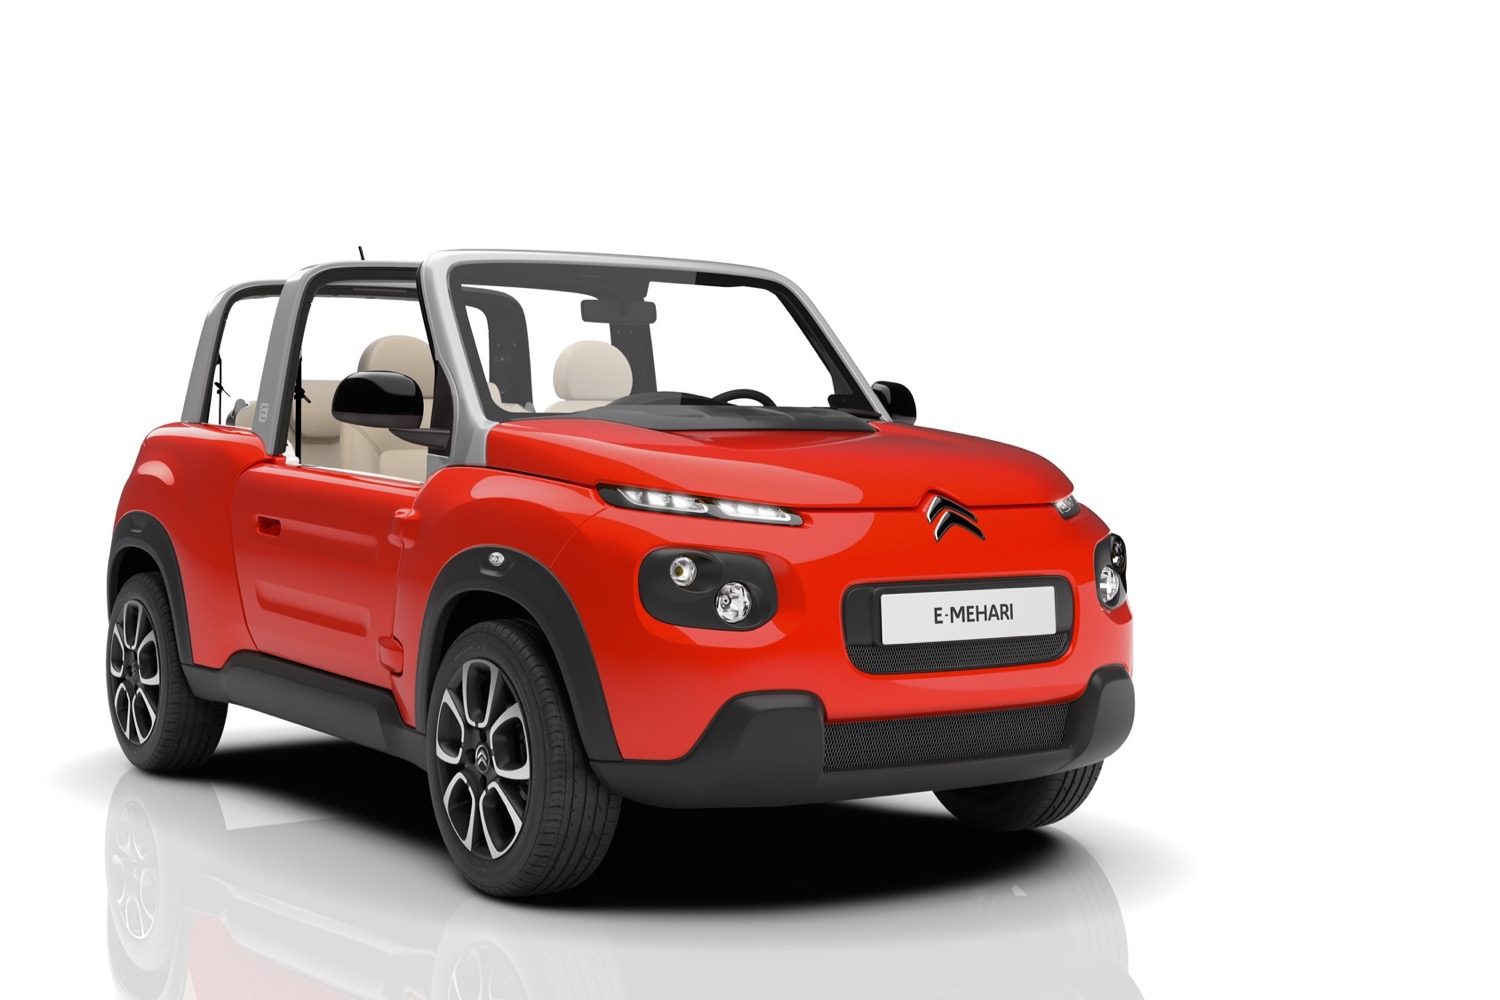 Electric Citroen E Mehari Open Air Utility Vehicle Now On Sale In France